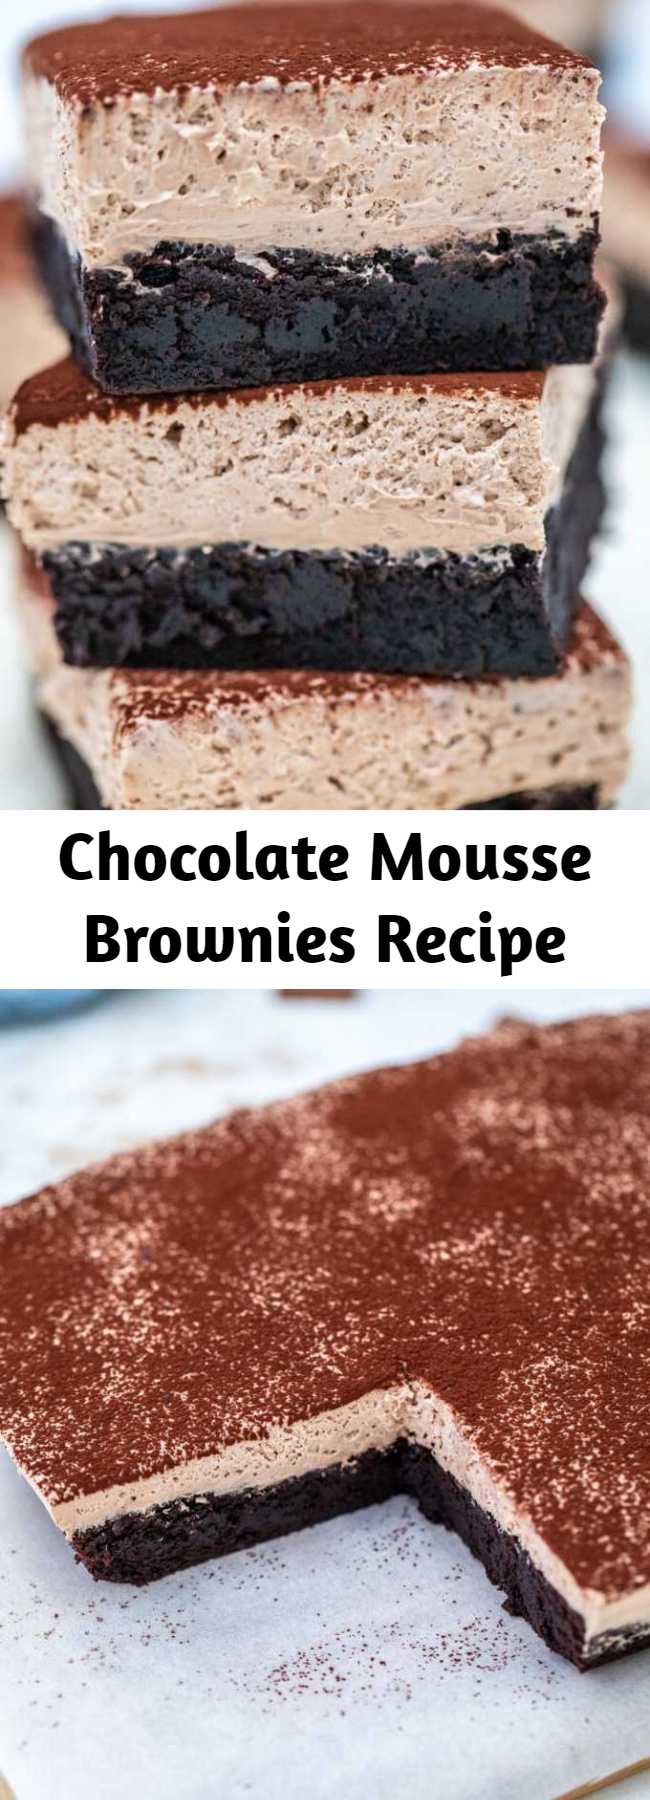 Chocolate Mousse Brownies Recipe - Chocolate Mousse Brownies are creamy, indulgent and loaded with chocolate, making them the perfect dessert. #brownies #chocolaterecipes #chocolate